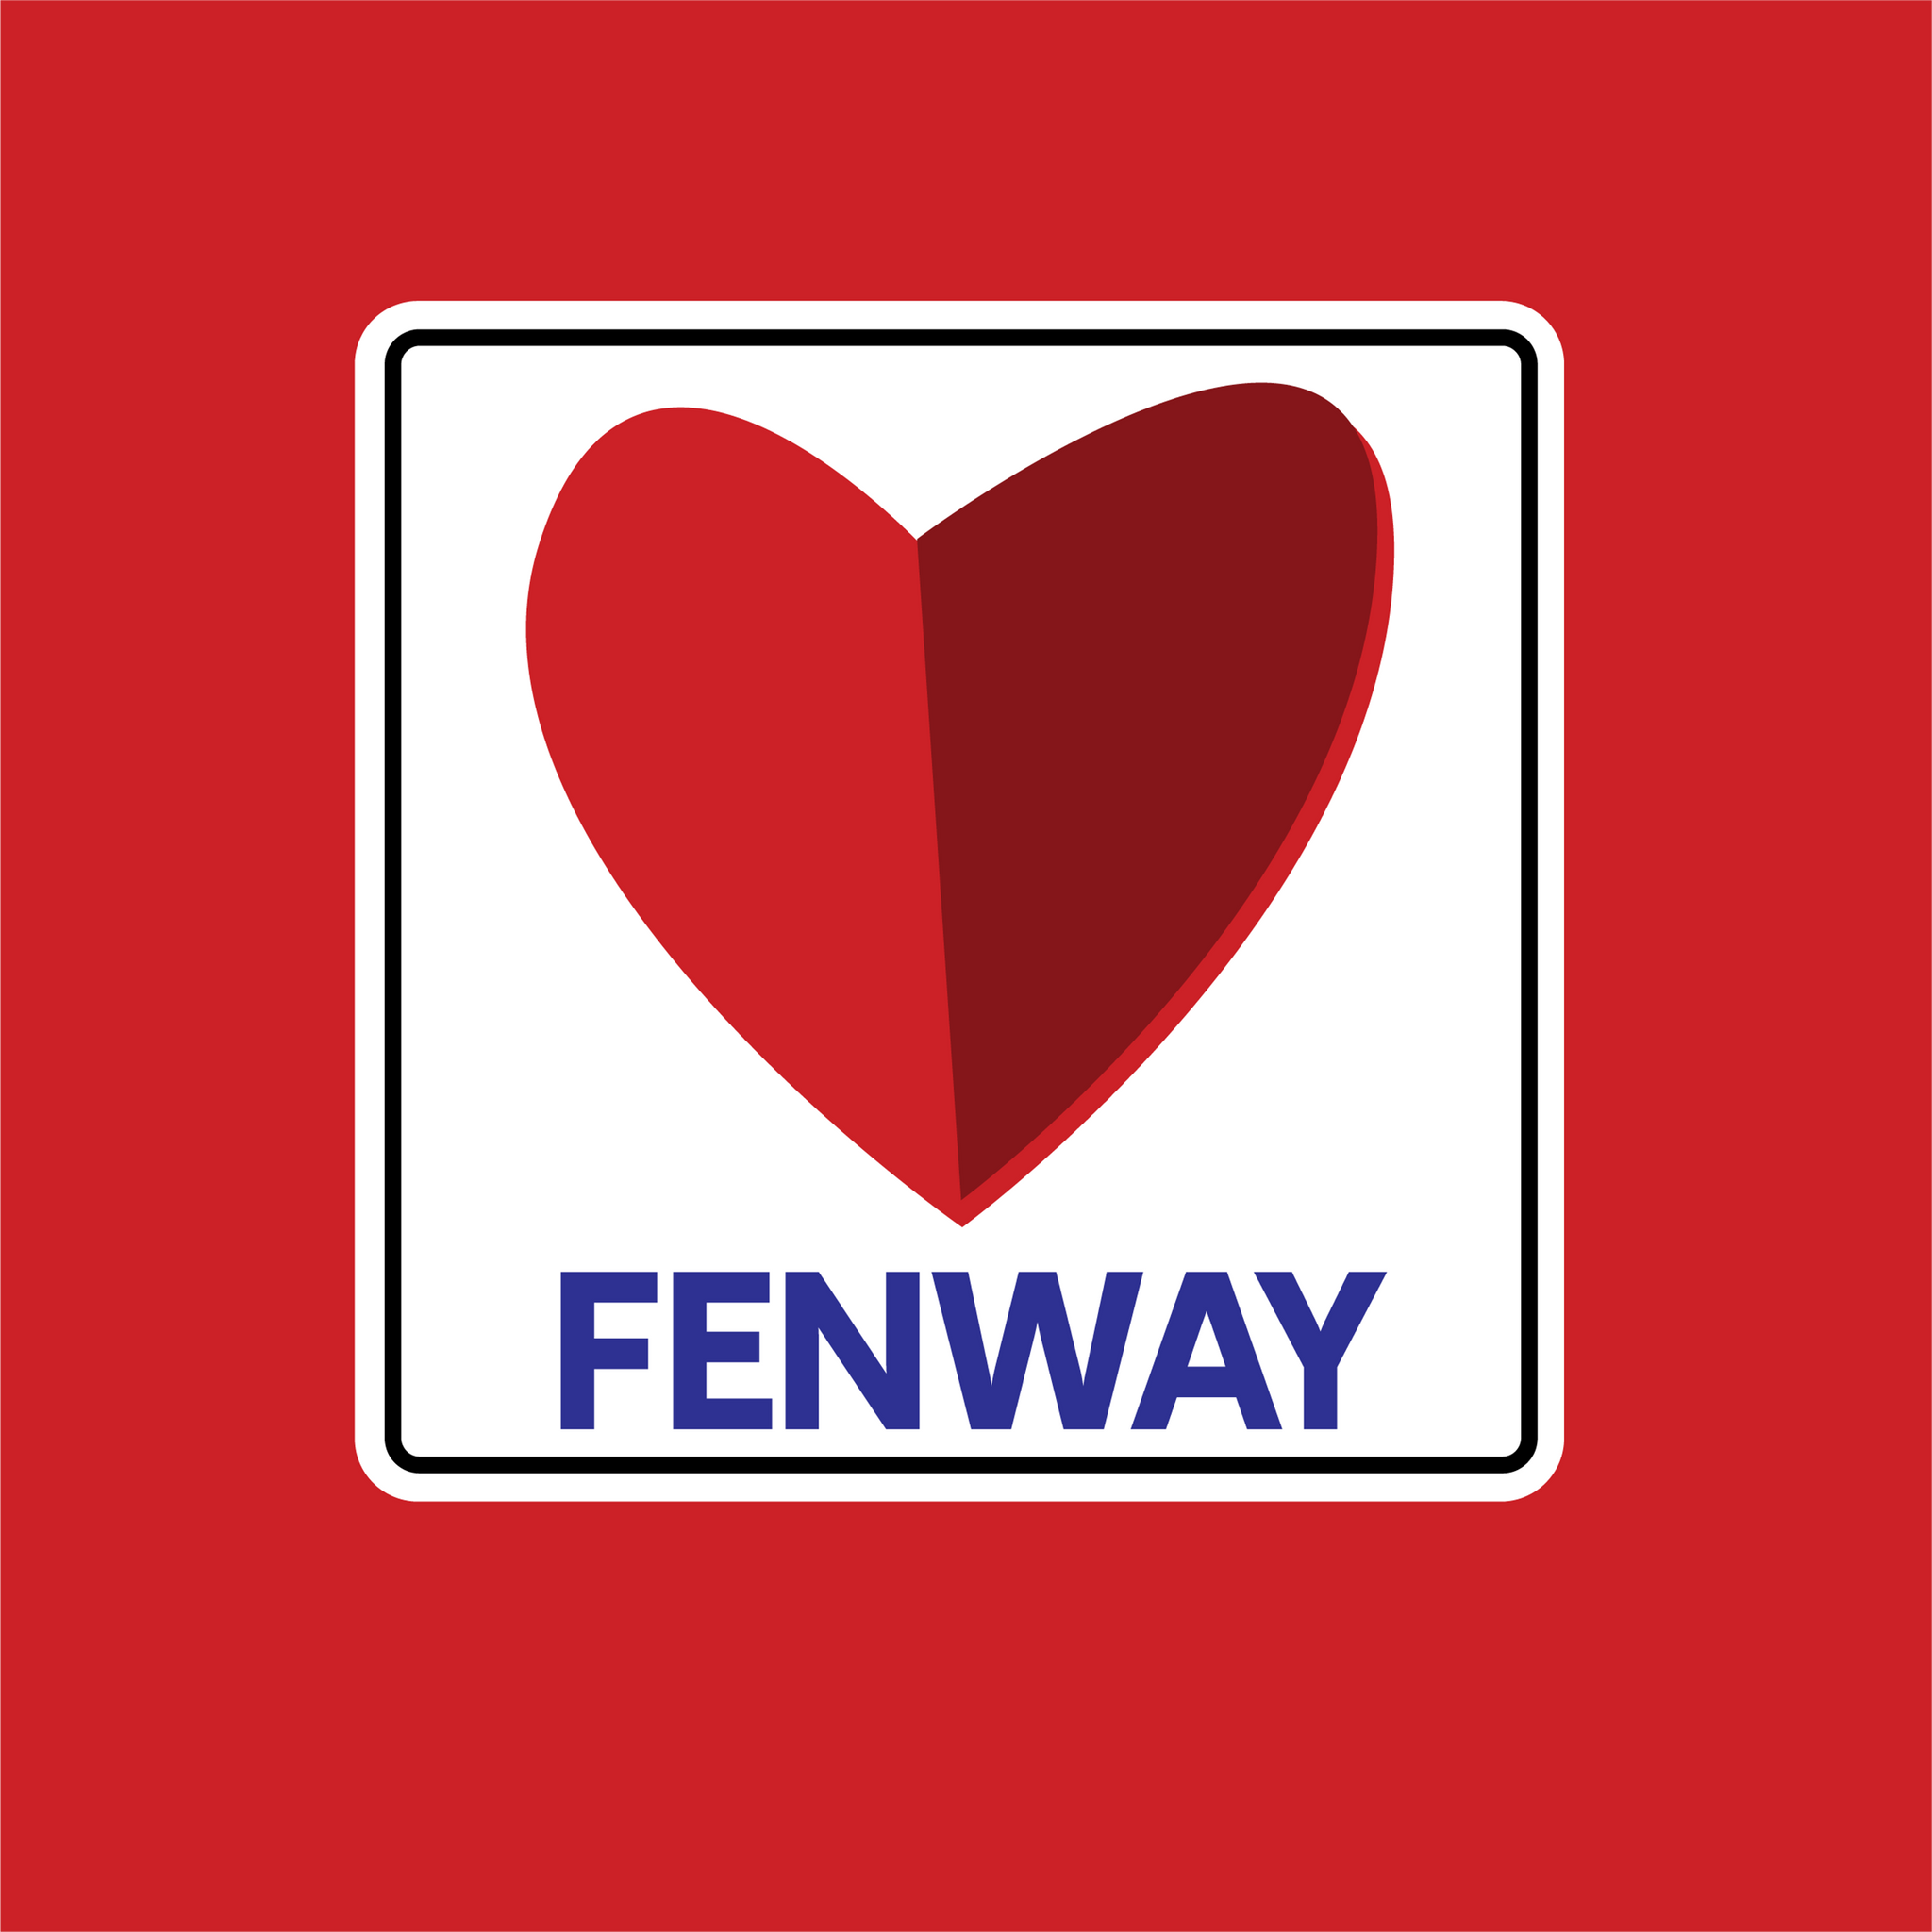 design of a square vinyl sticker with the word FENWAY and a heart in the style of the boston citgo sign on a red background